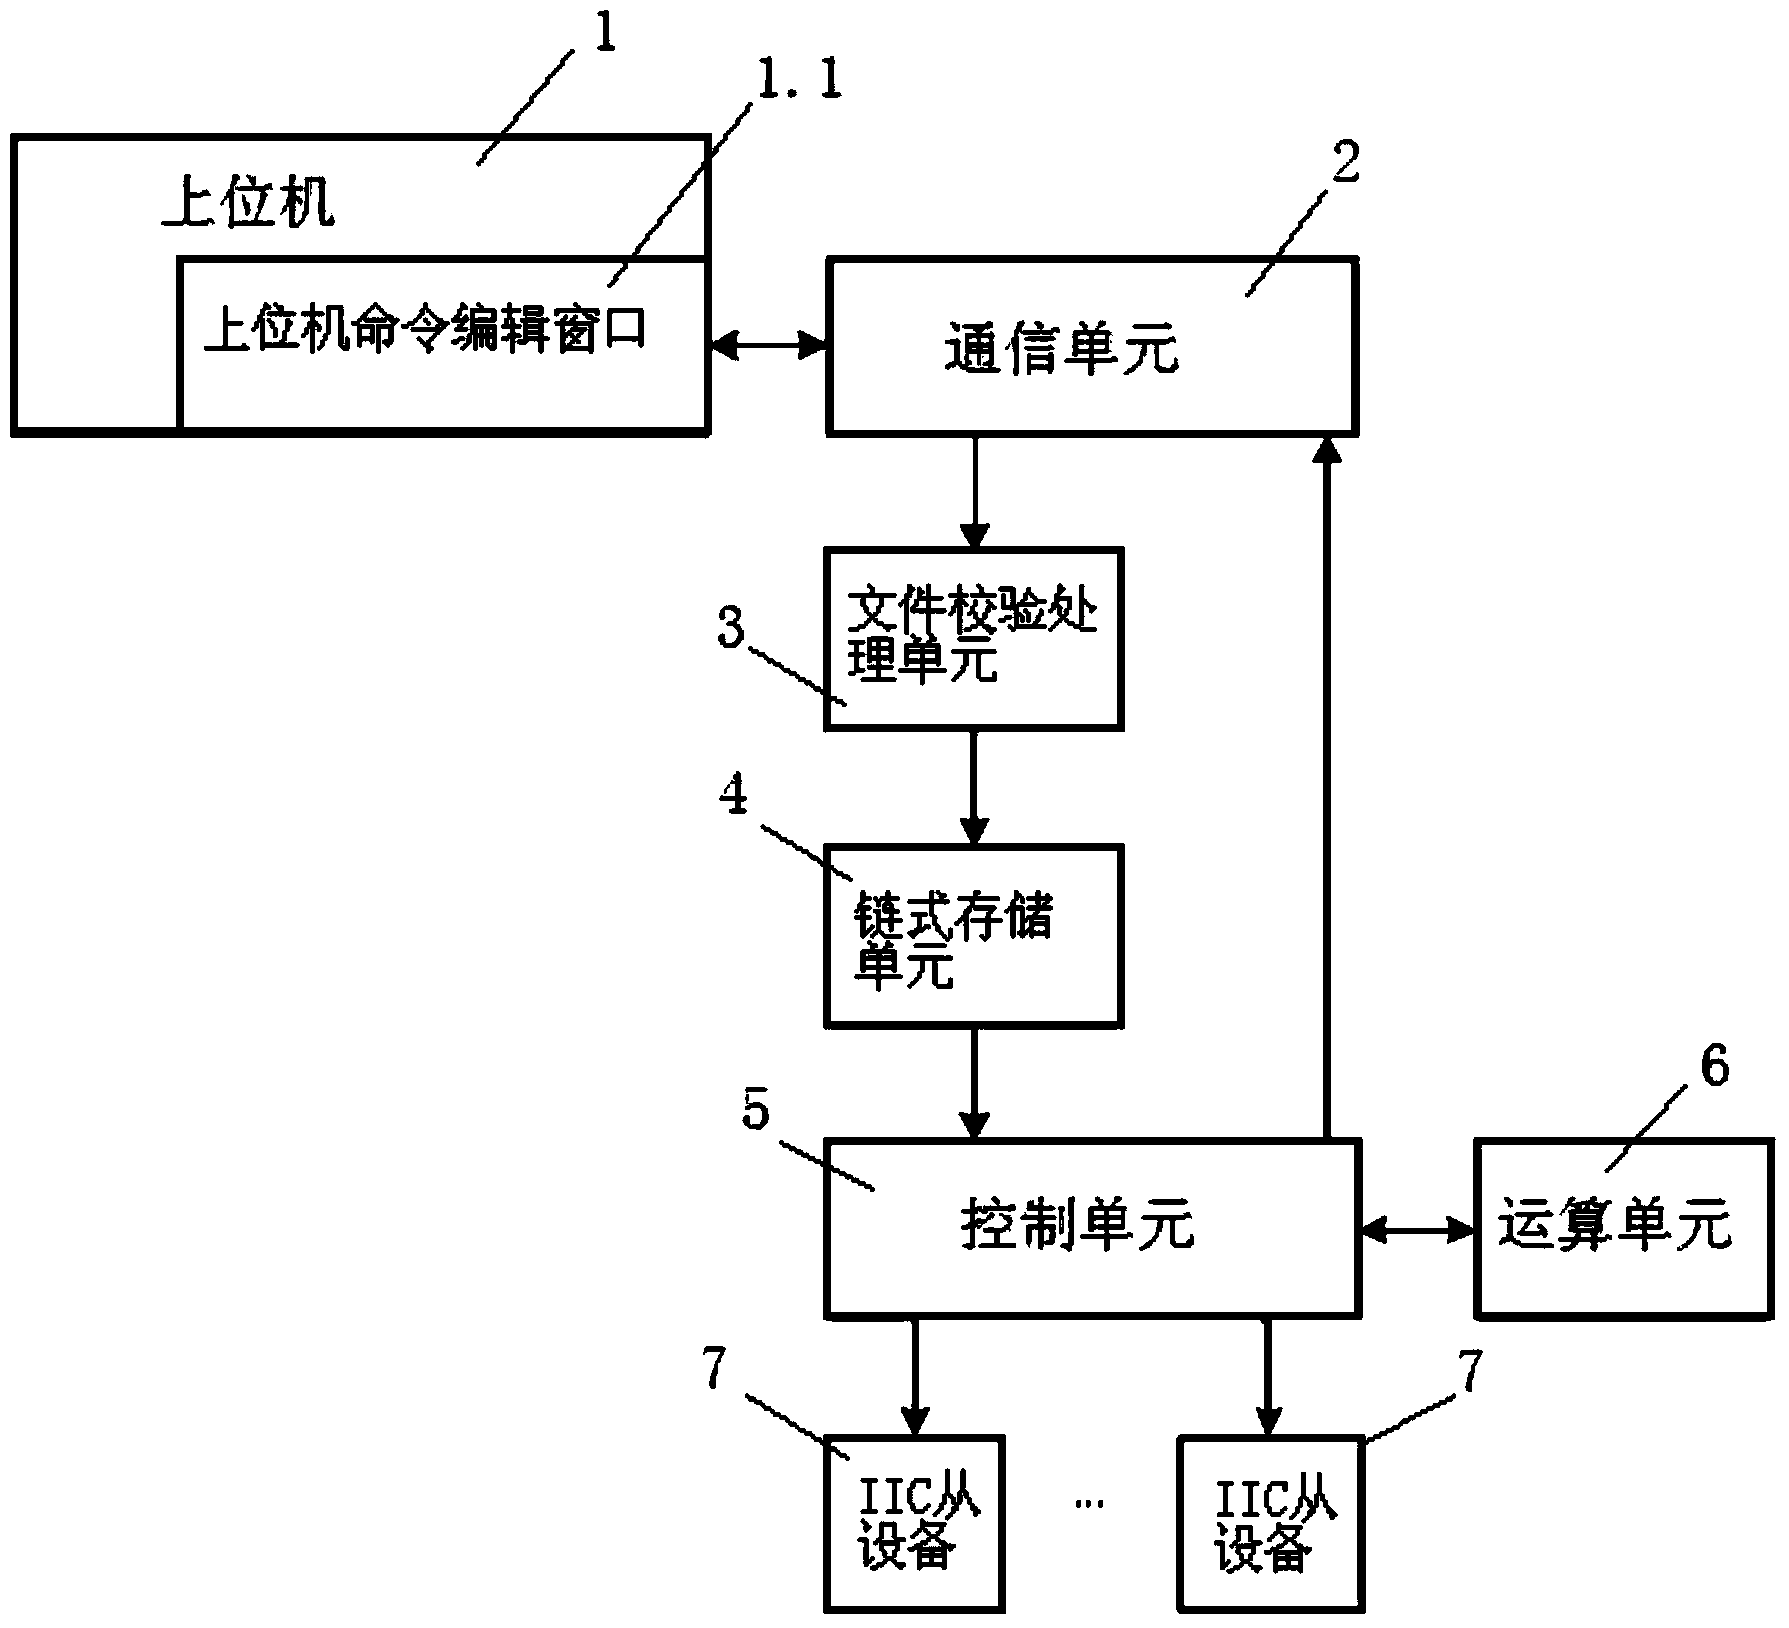 IIC (Inter-Integrated Circuit) batch command processing control method